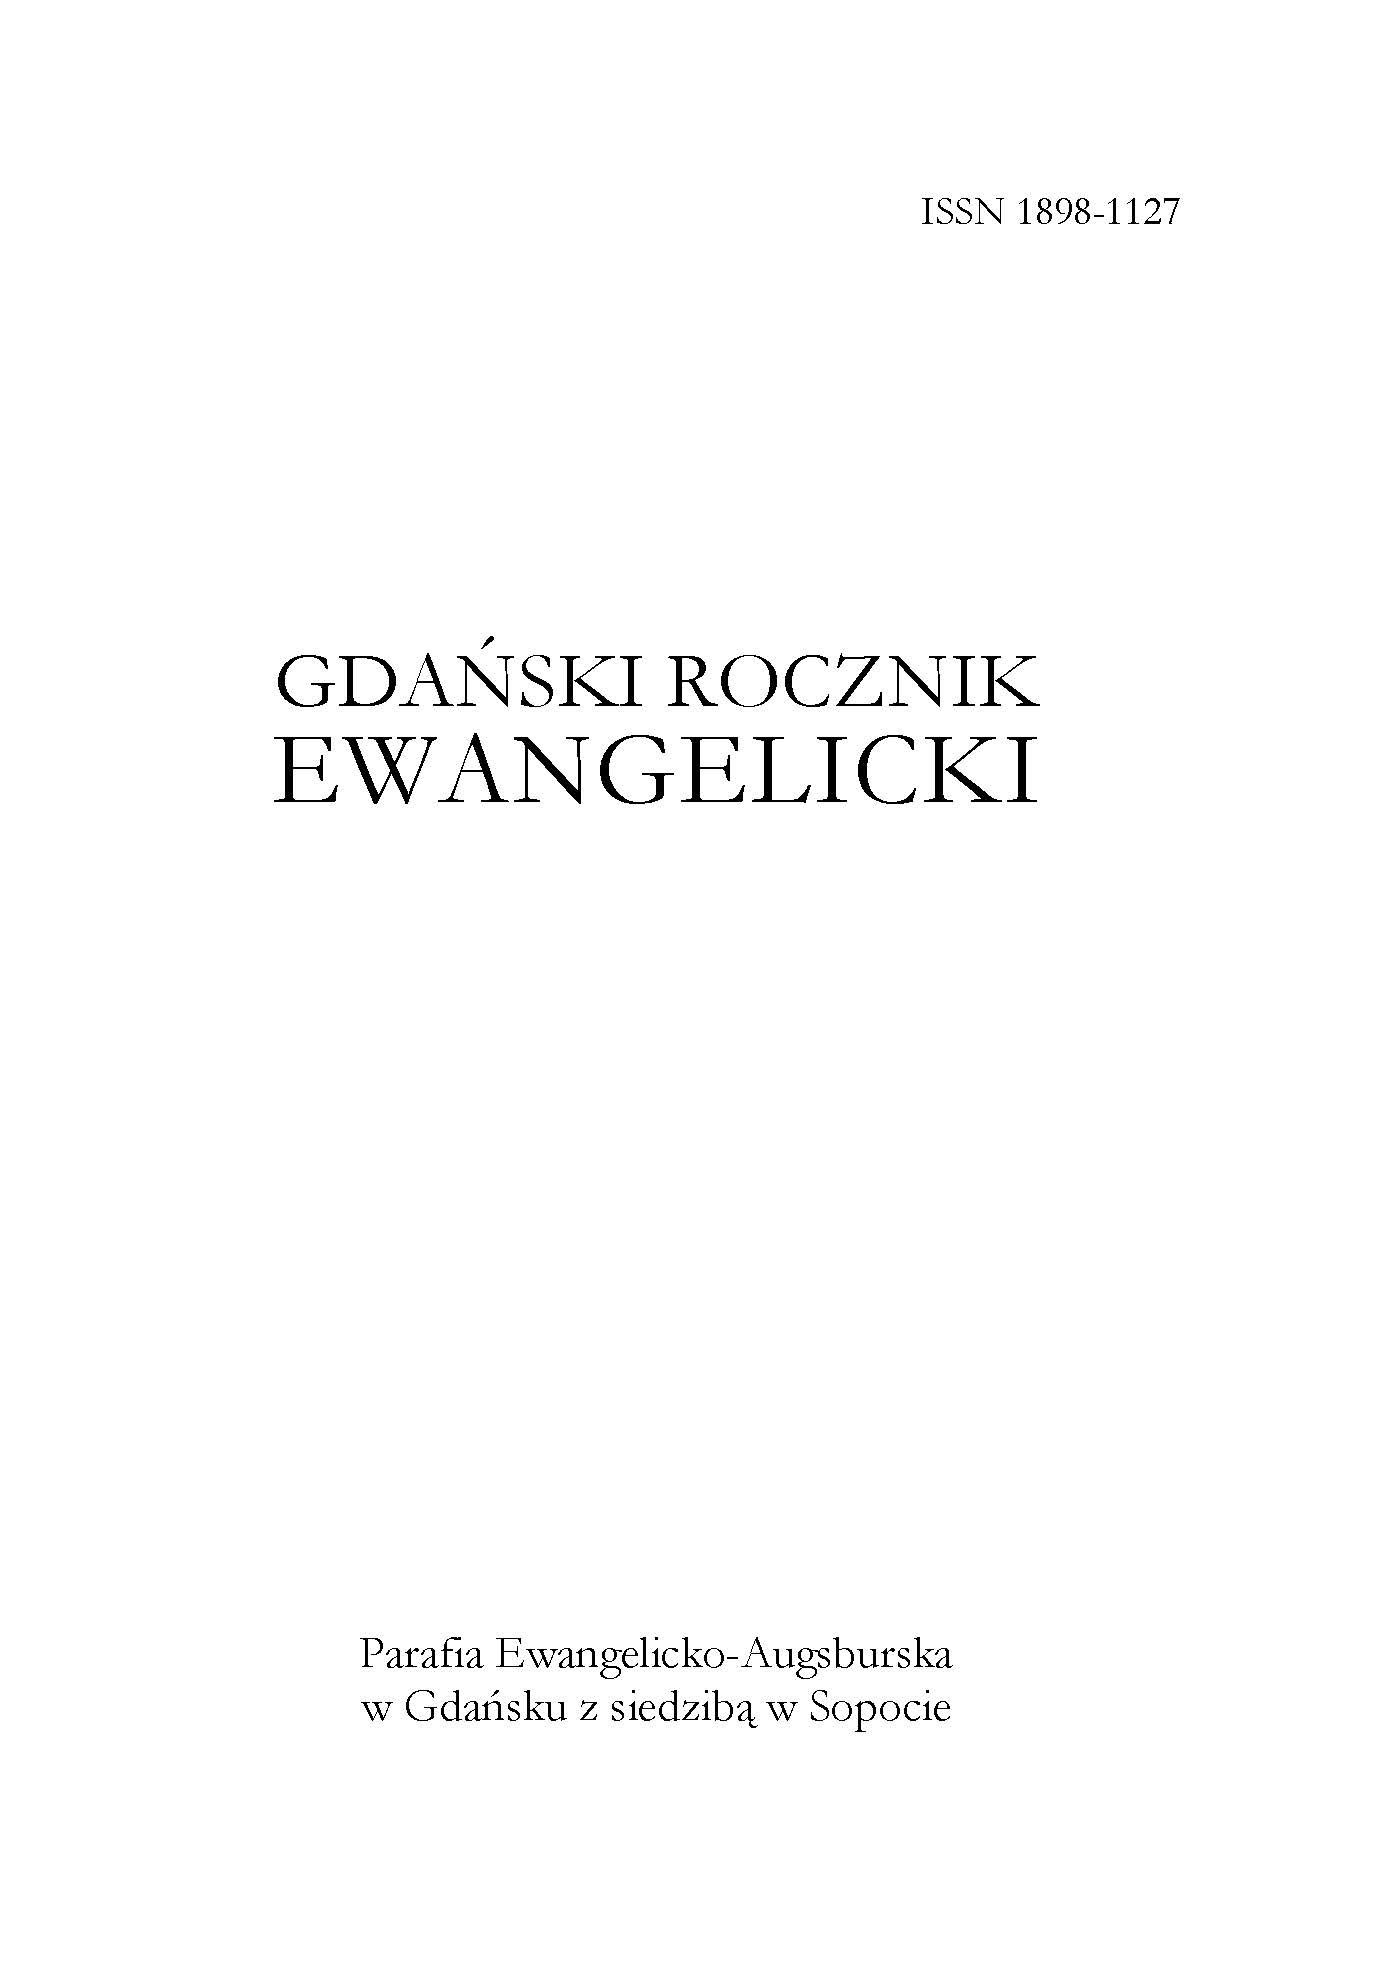 Selected Ascpects of Charity in the Protestant Gdańsk in the XVI-XVIII Centuries Cover Image